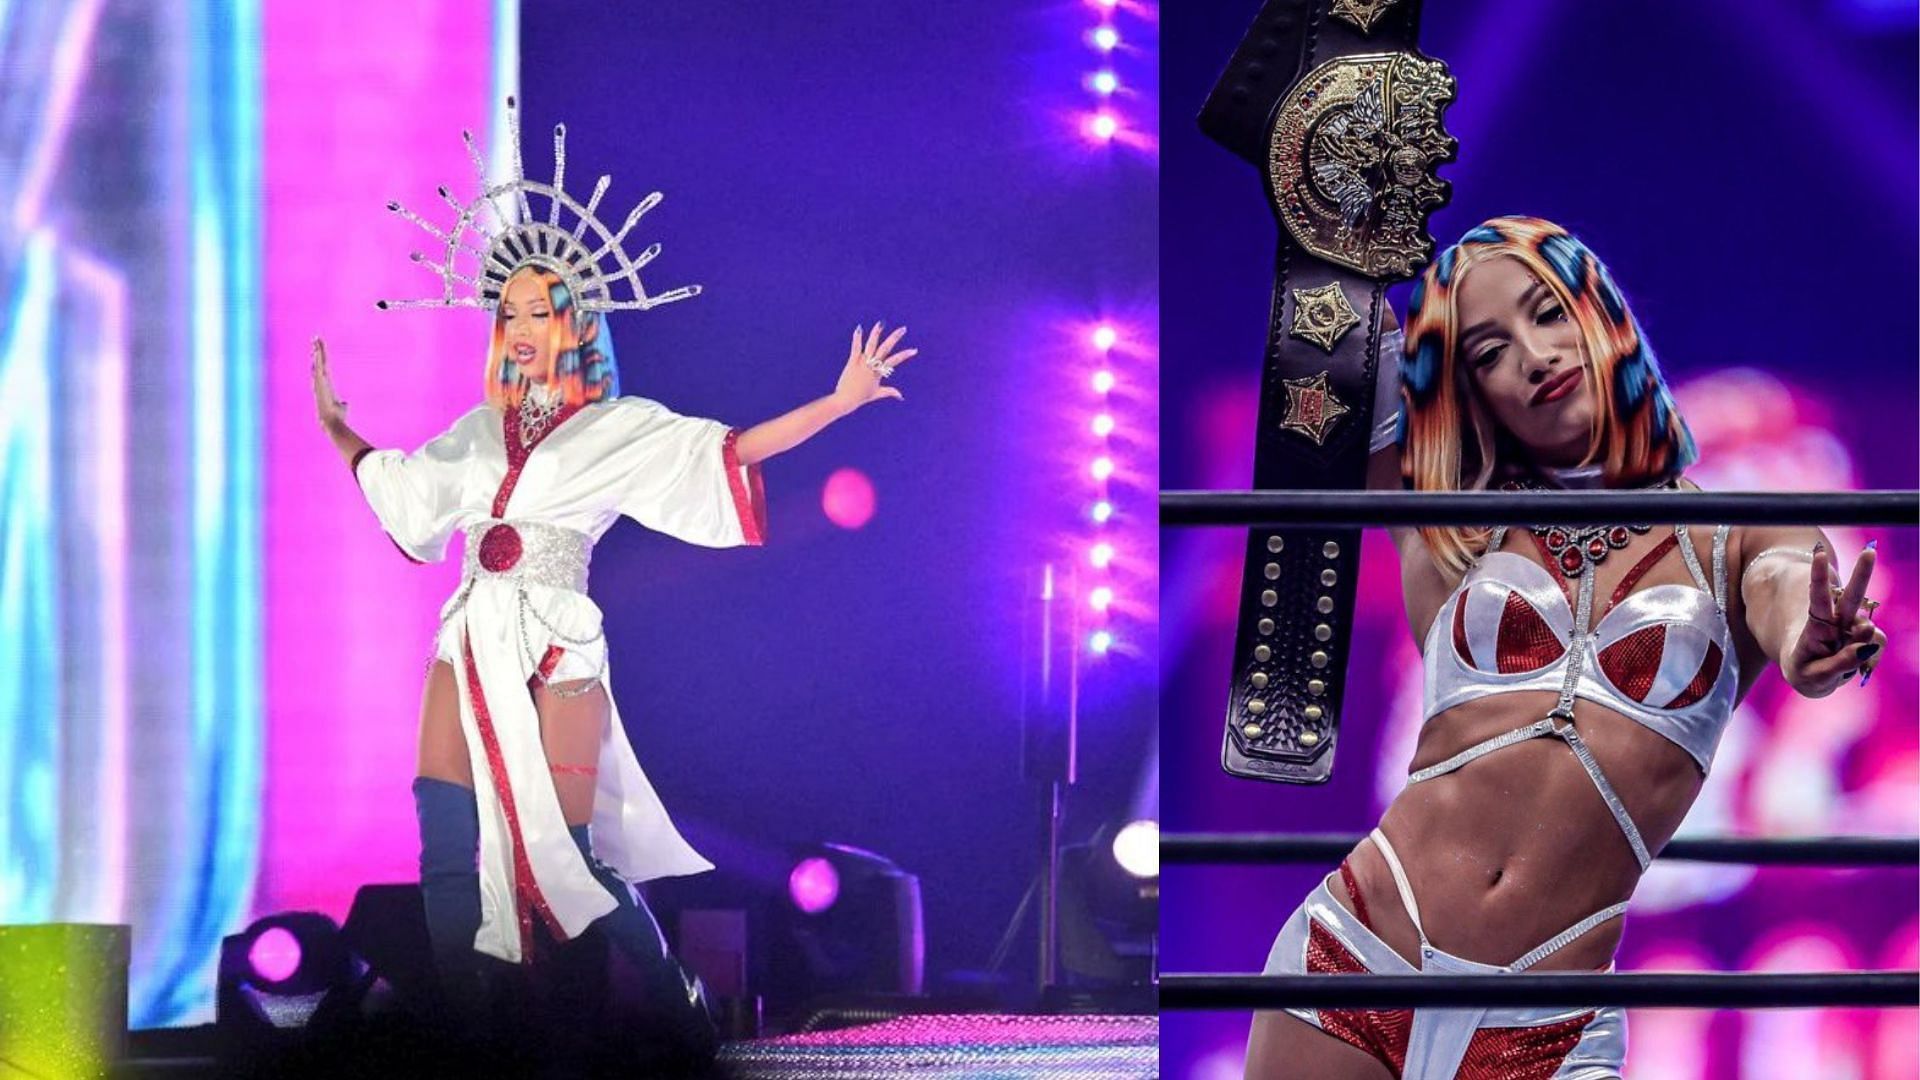 Mercedes Mone made her NJPW debut in January 2023